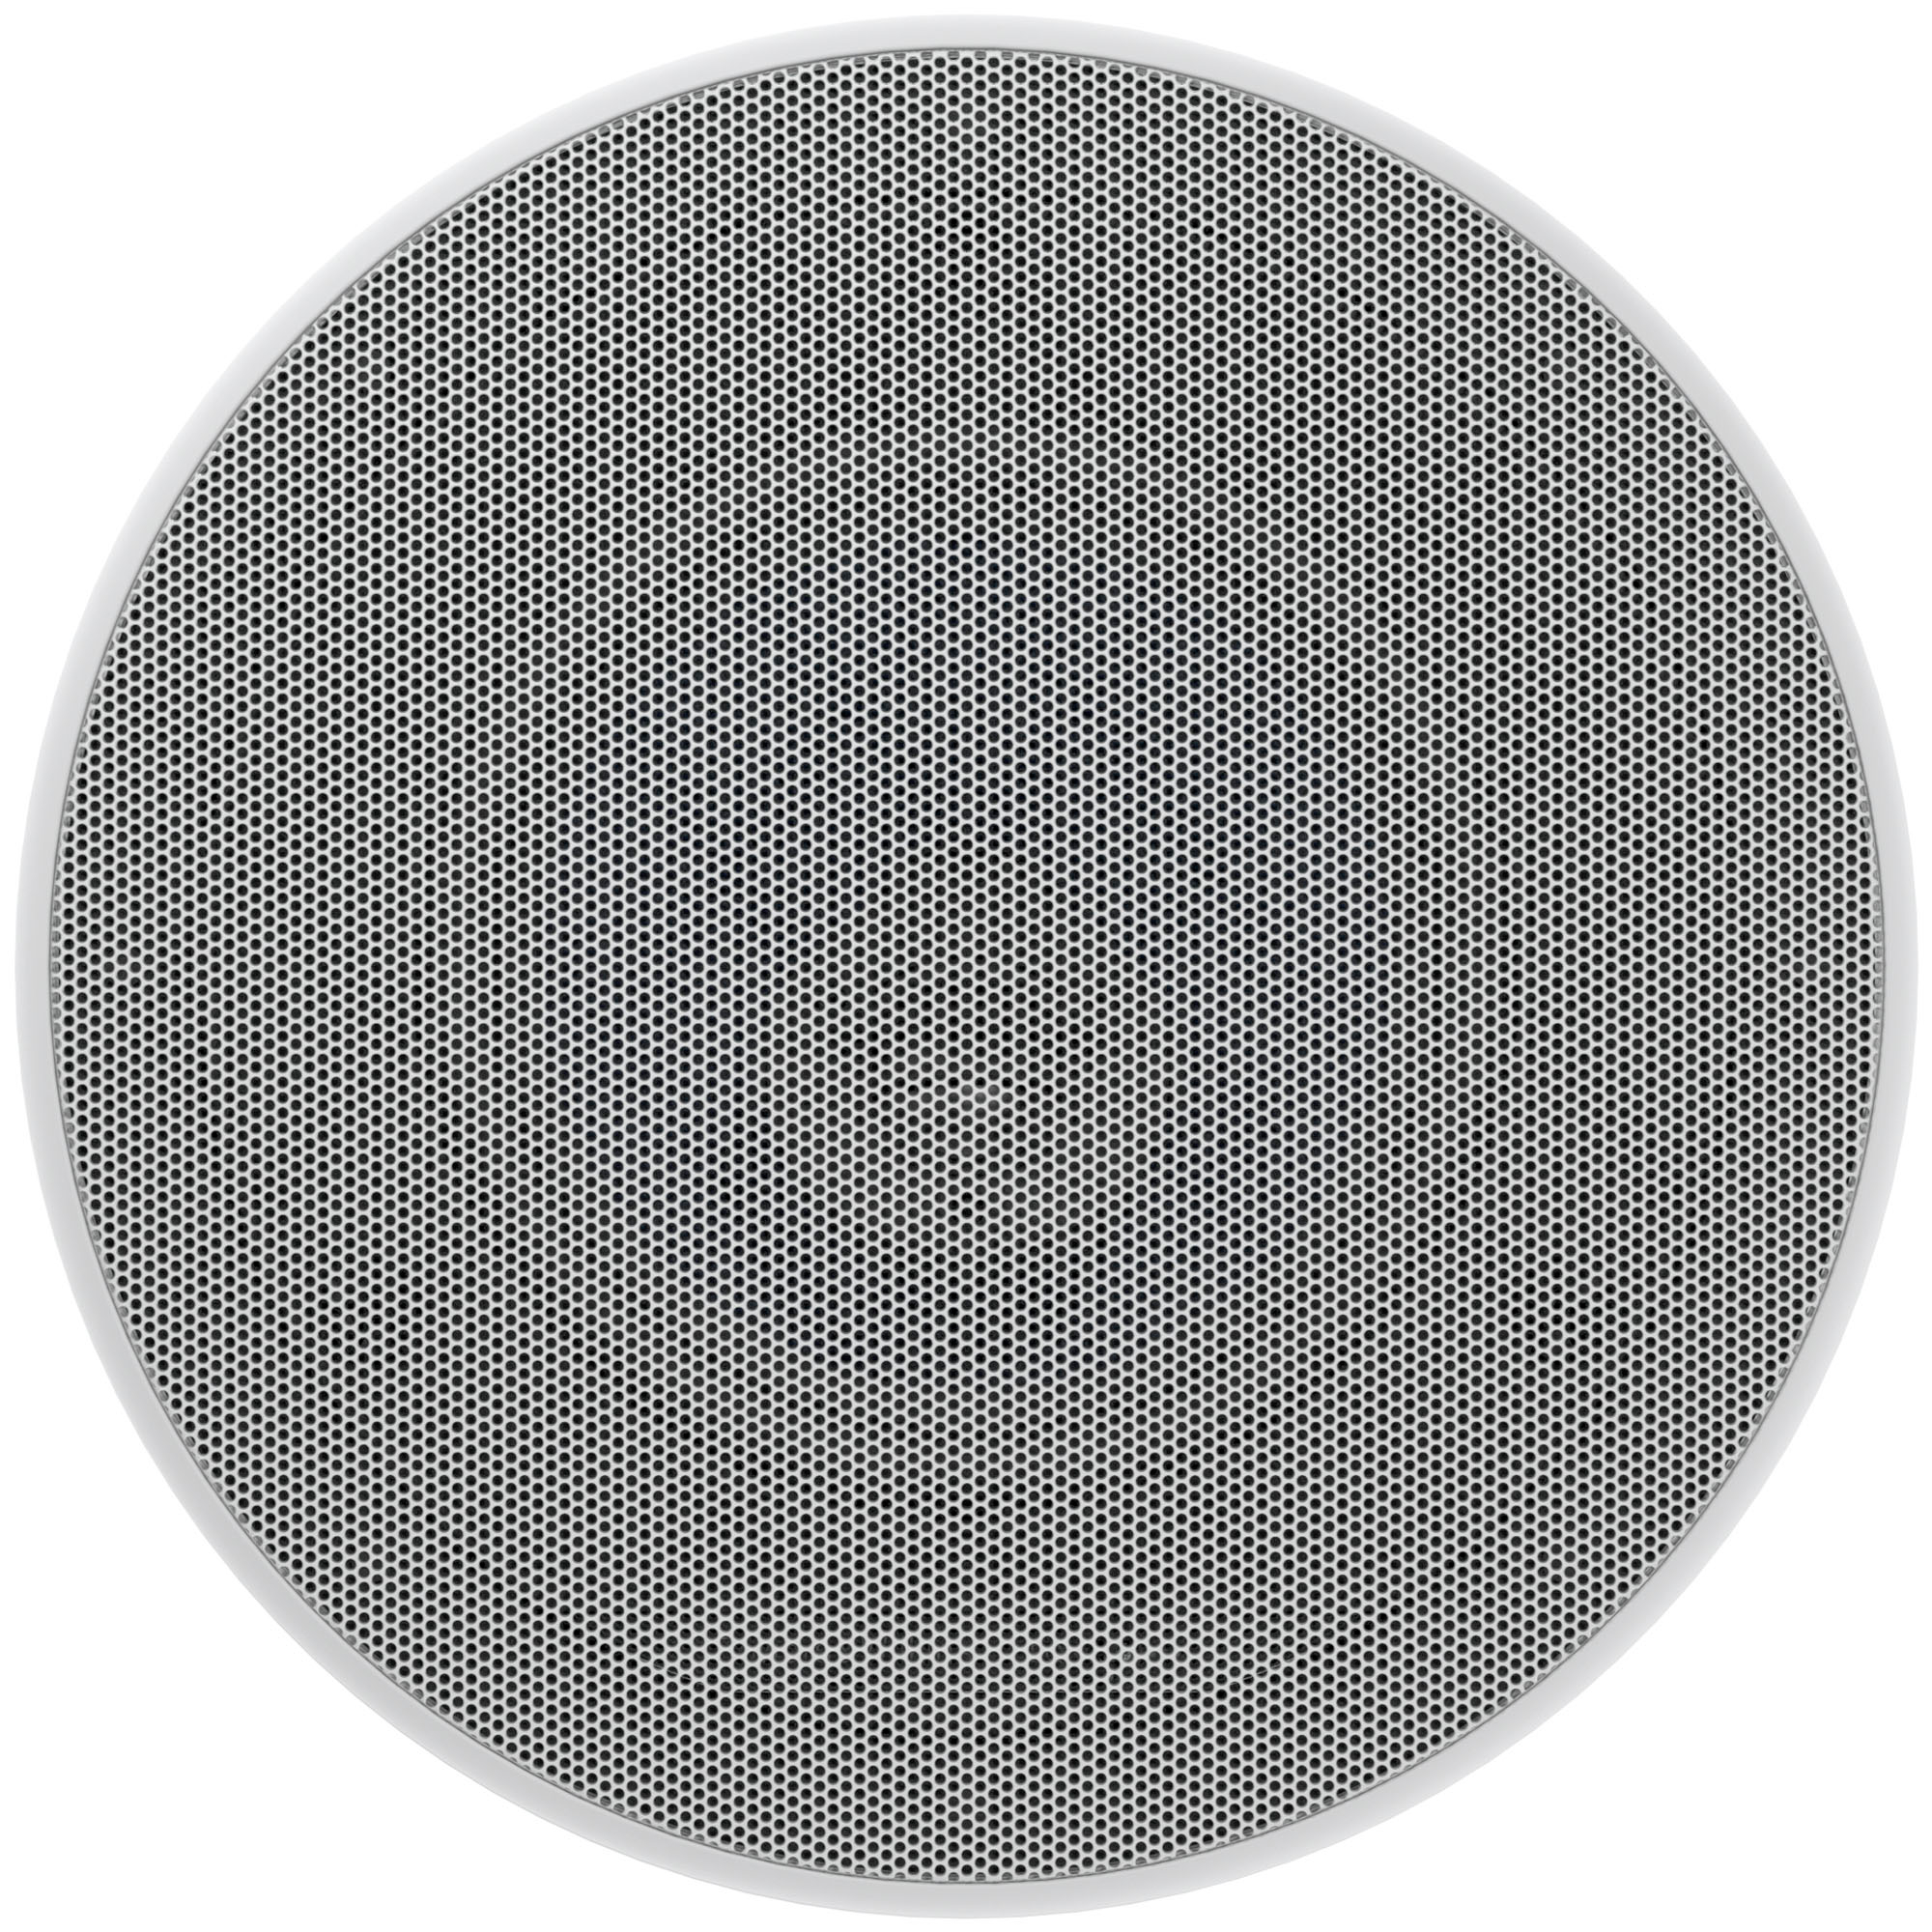 Angle View: Bowers & Wilkins - CI600 Series 6" Dual Channel Stereo Surround In-Ceiling Speaker w/Glass Fiber Midbass - (Each) - Paintable White